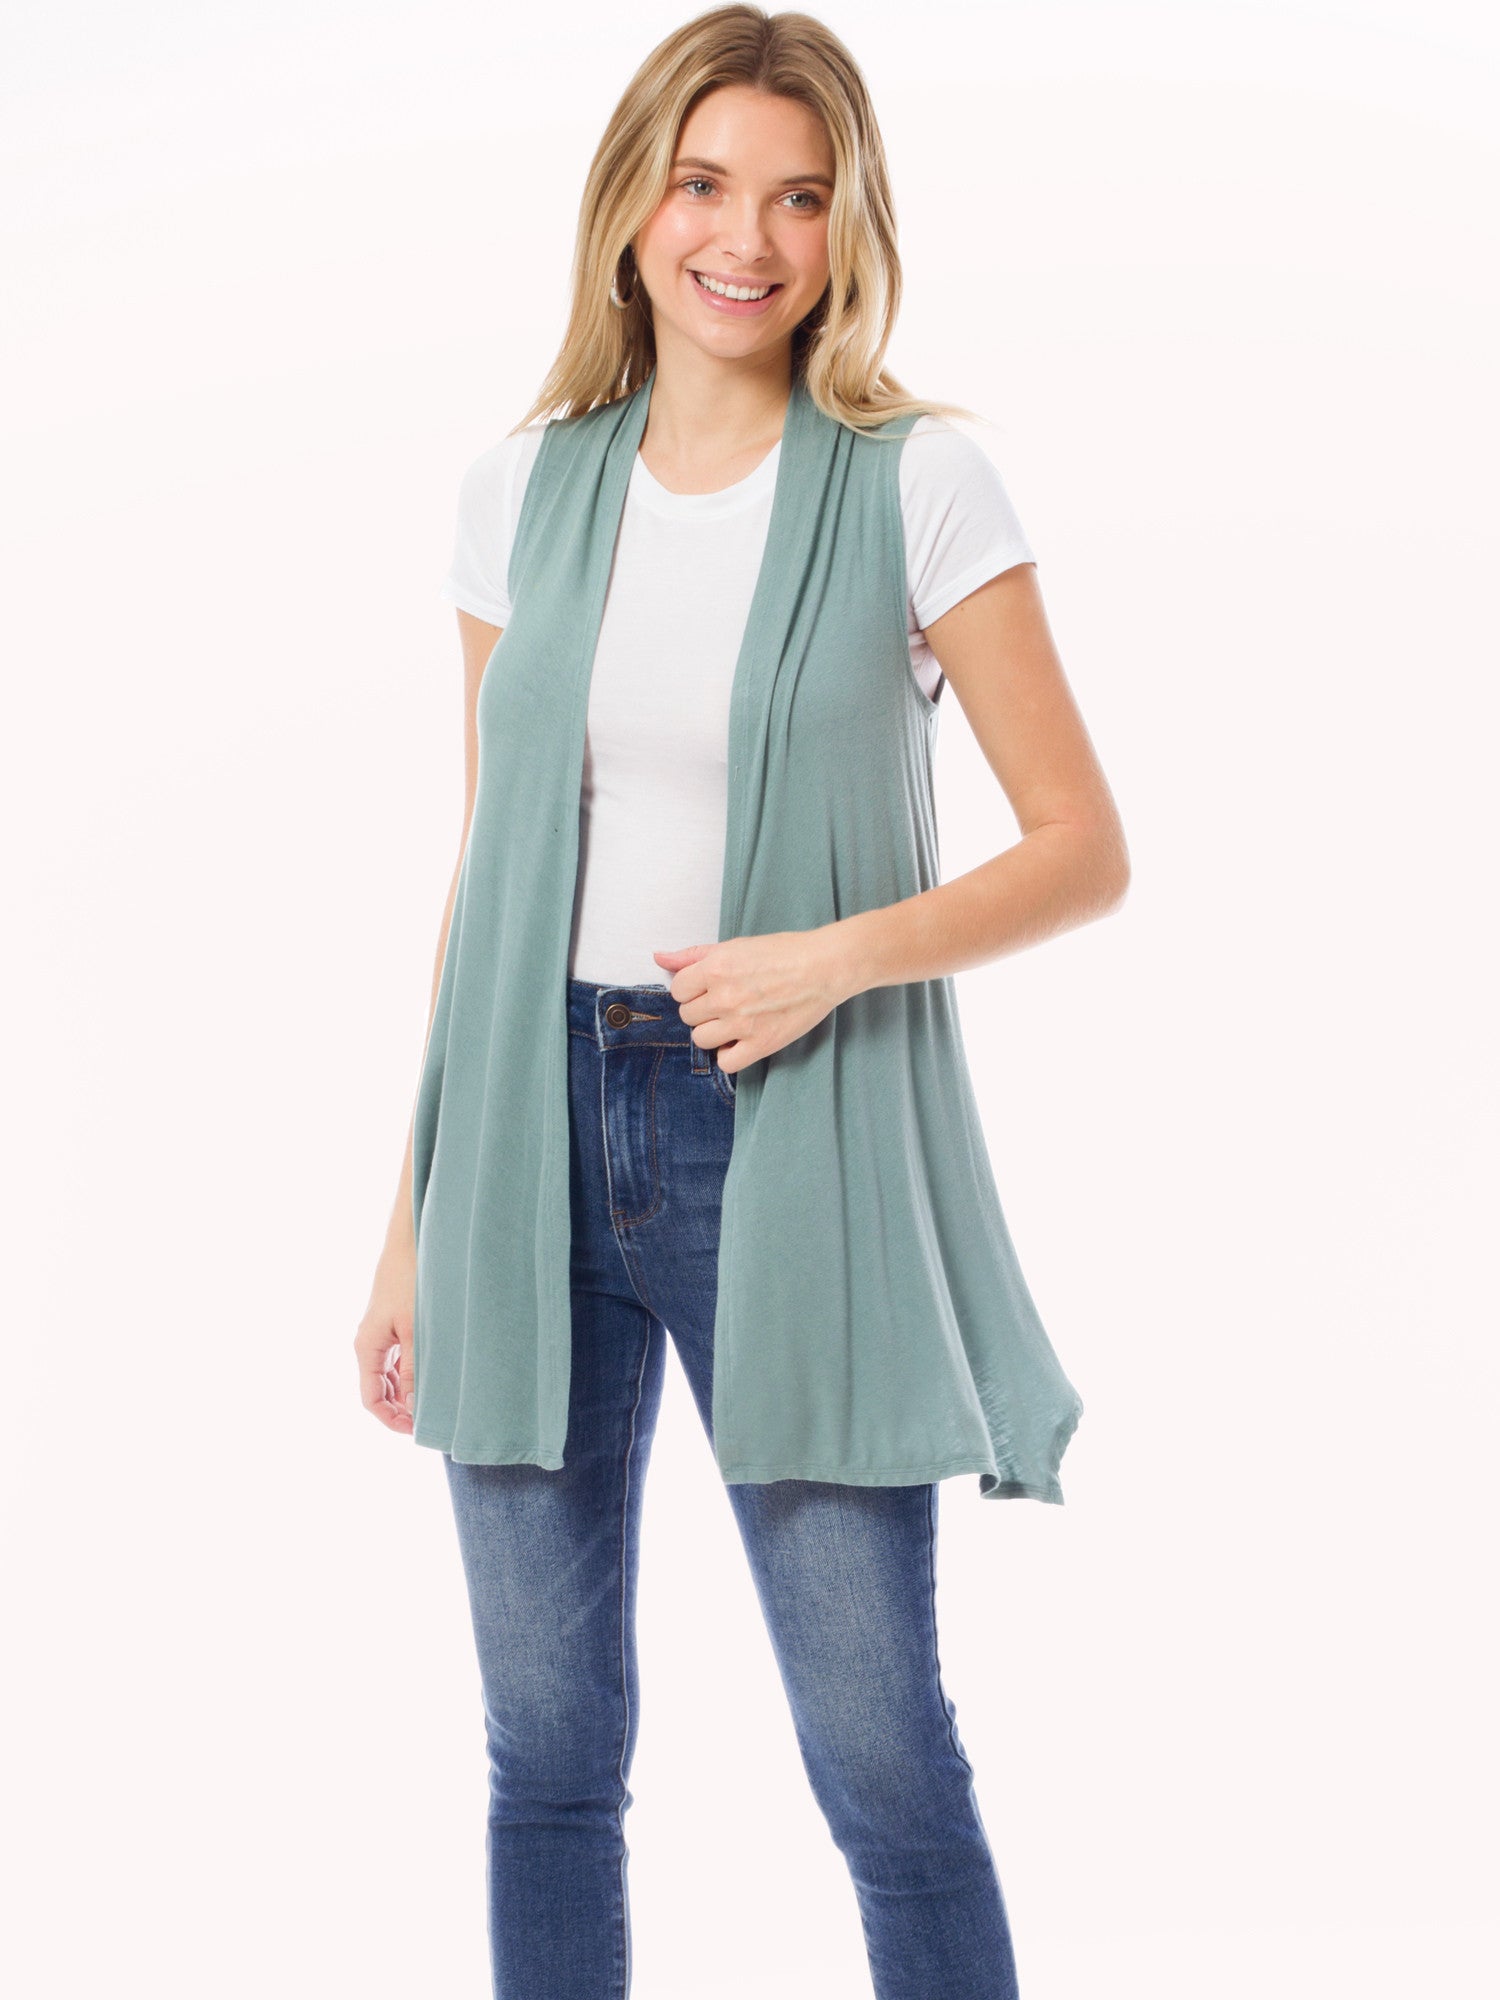 Solid Sleeveless Open Front Sheer Fabric Long Vest Cardigan